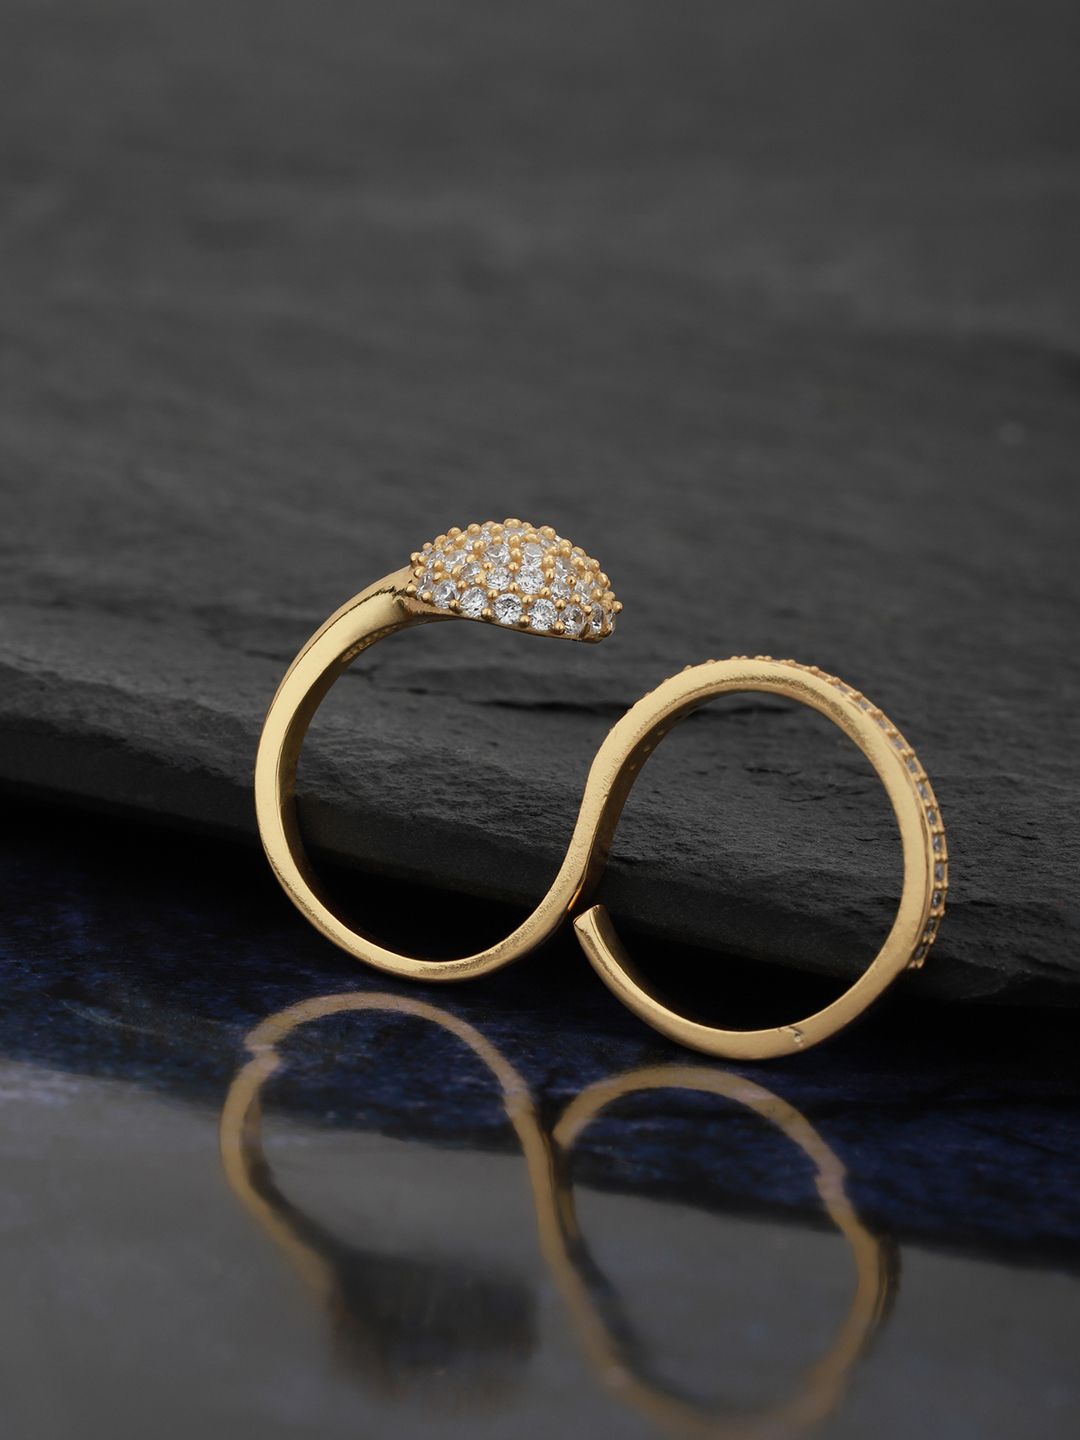 Carlton London Women Gold-Plated CZ-Studded Handcrafted Adjustable Dual Finger Ring Price in India